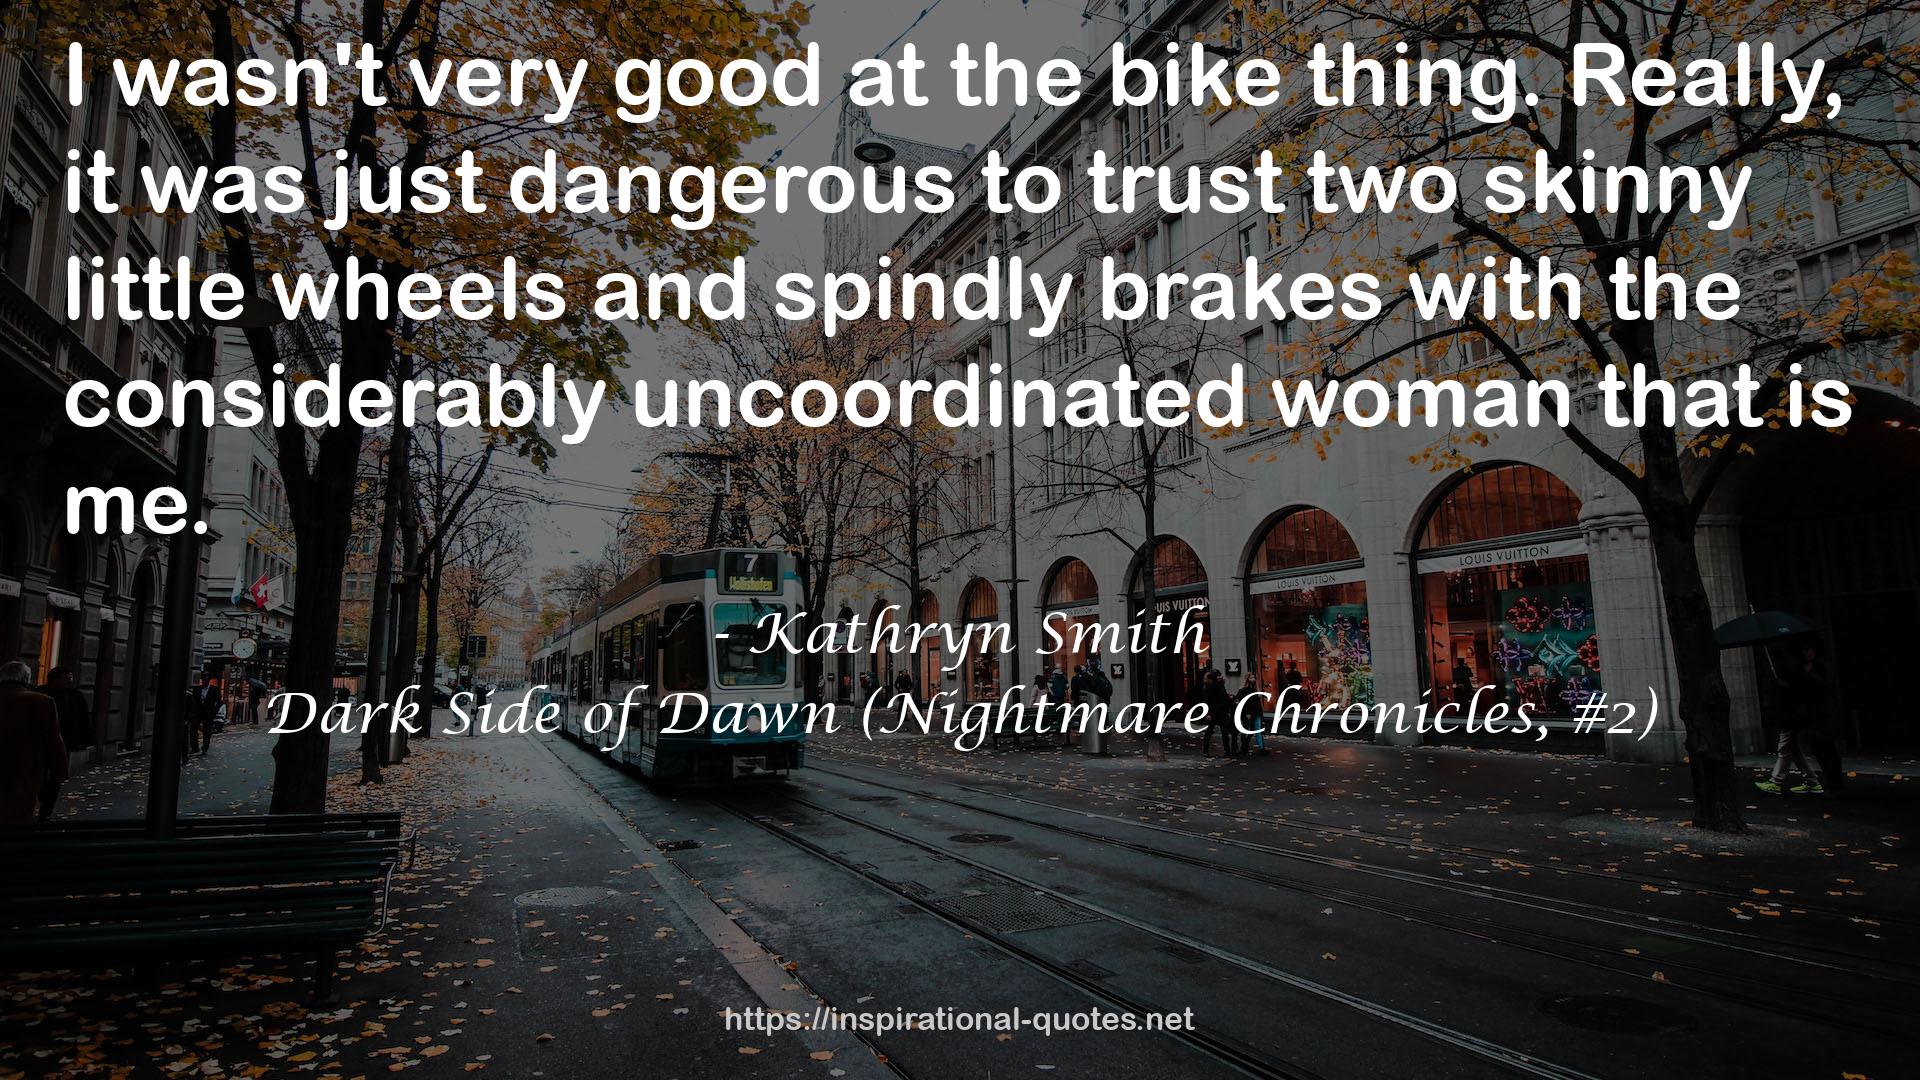 Dark Side of Dawn (Nightmare Chronicles, #2) QUOTES